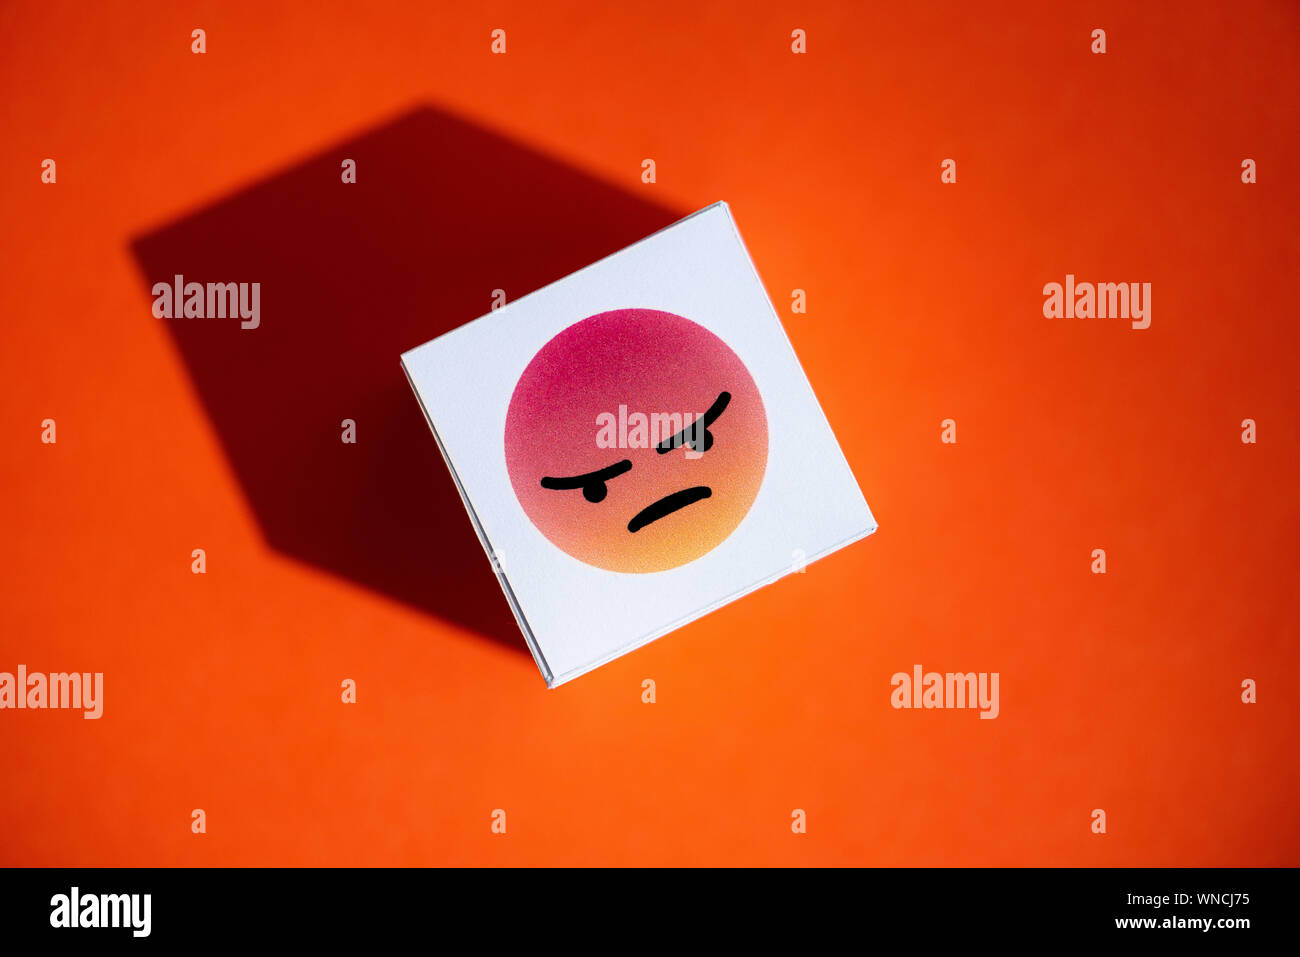 An anger emoji symbol from Facebook Messenger printed on a paper cube, that placed on a orange background. Stock Photo